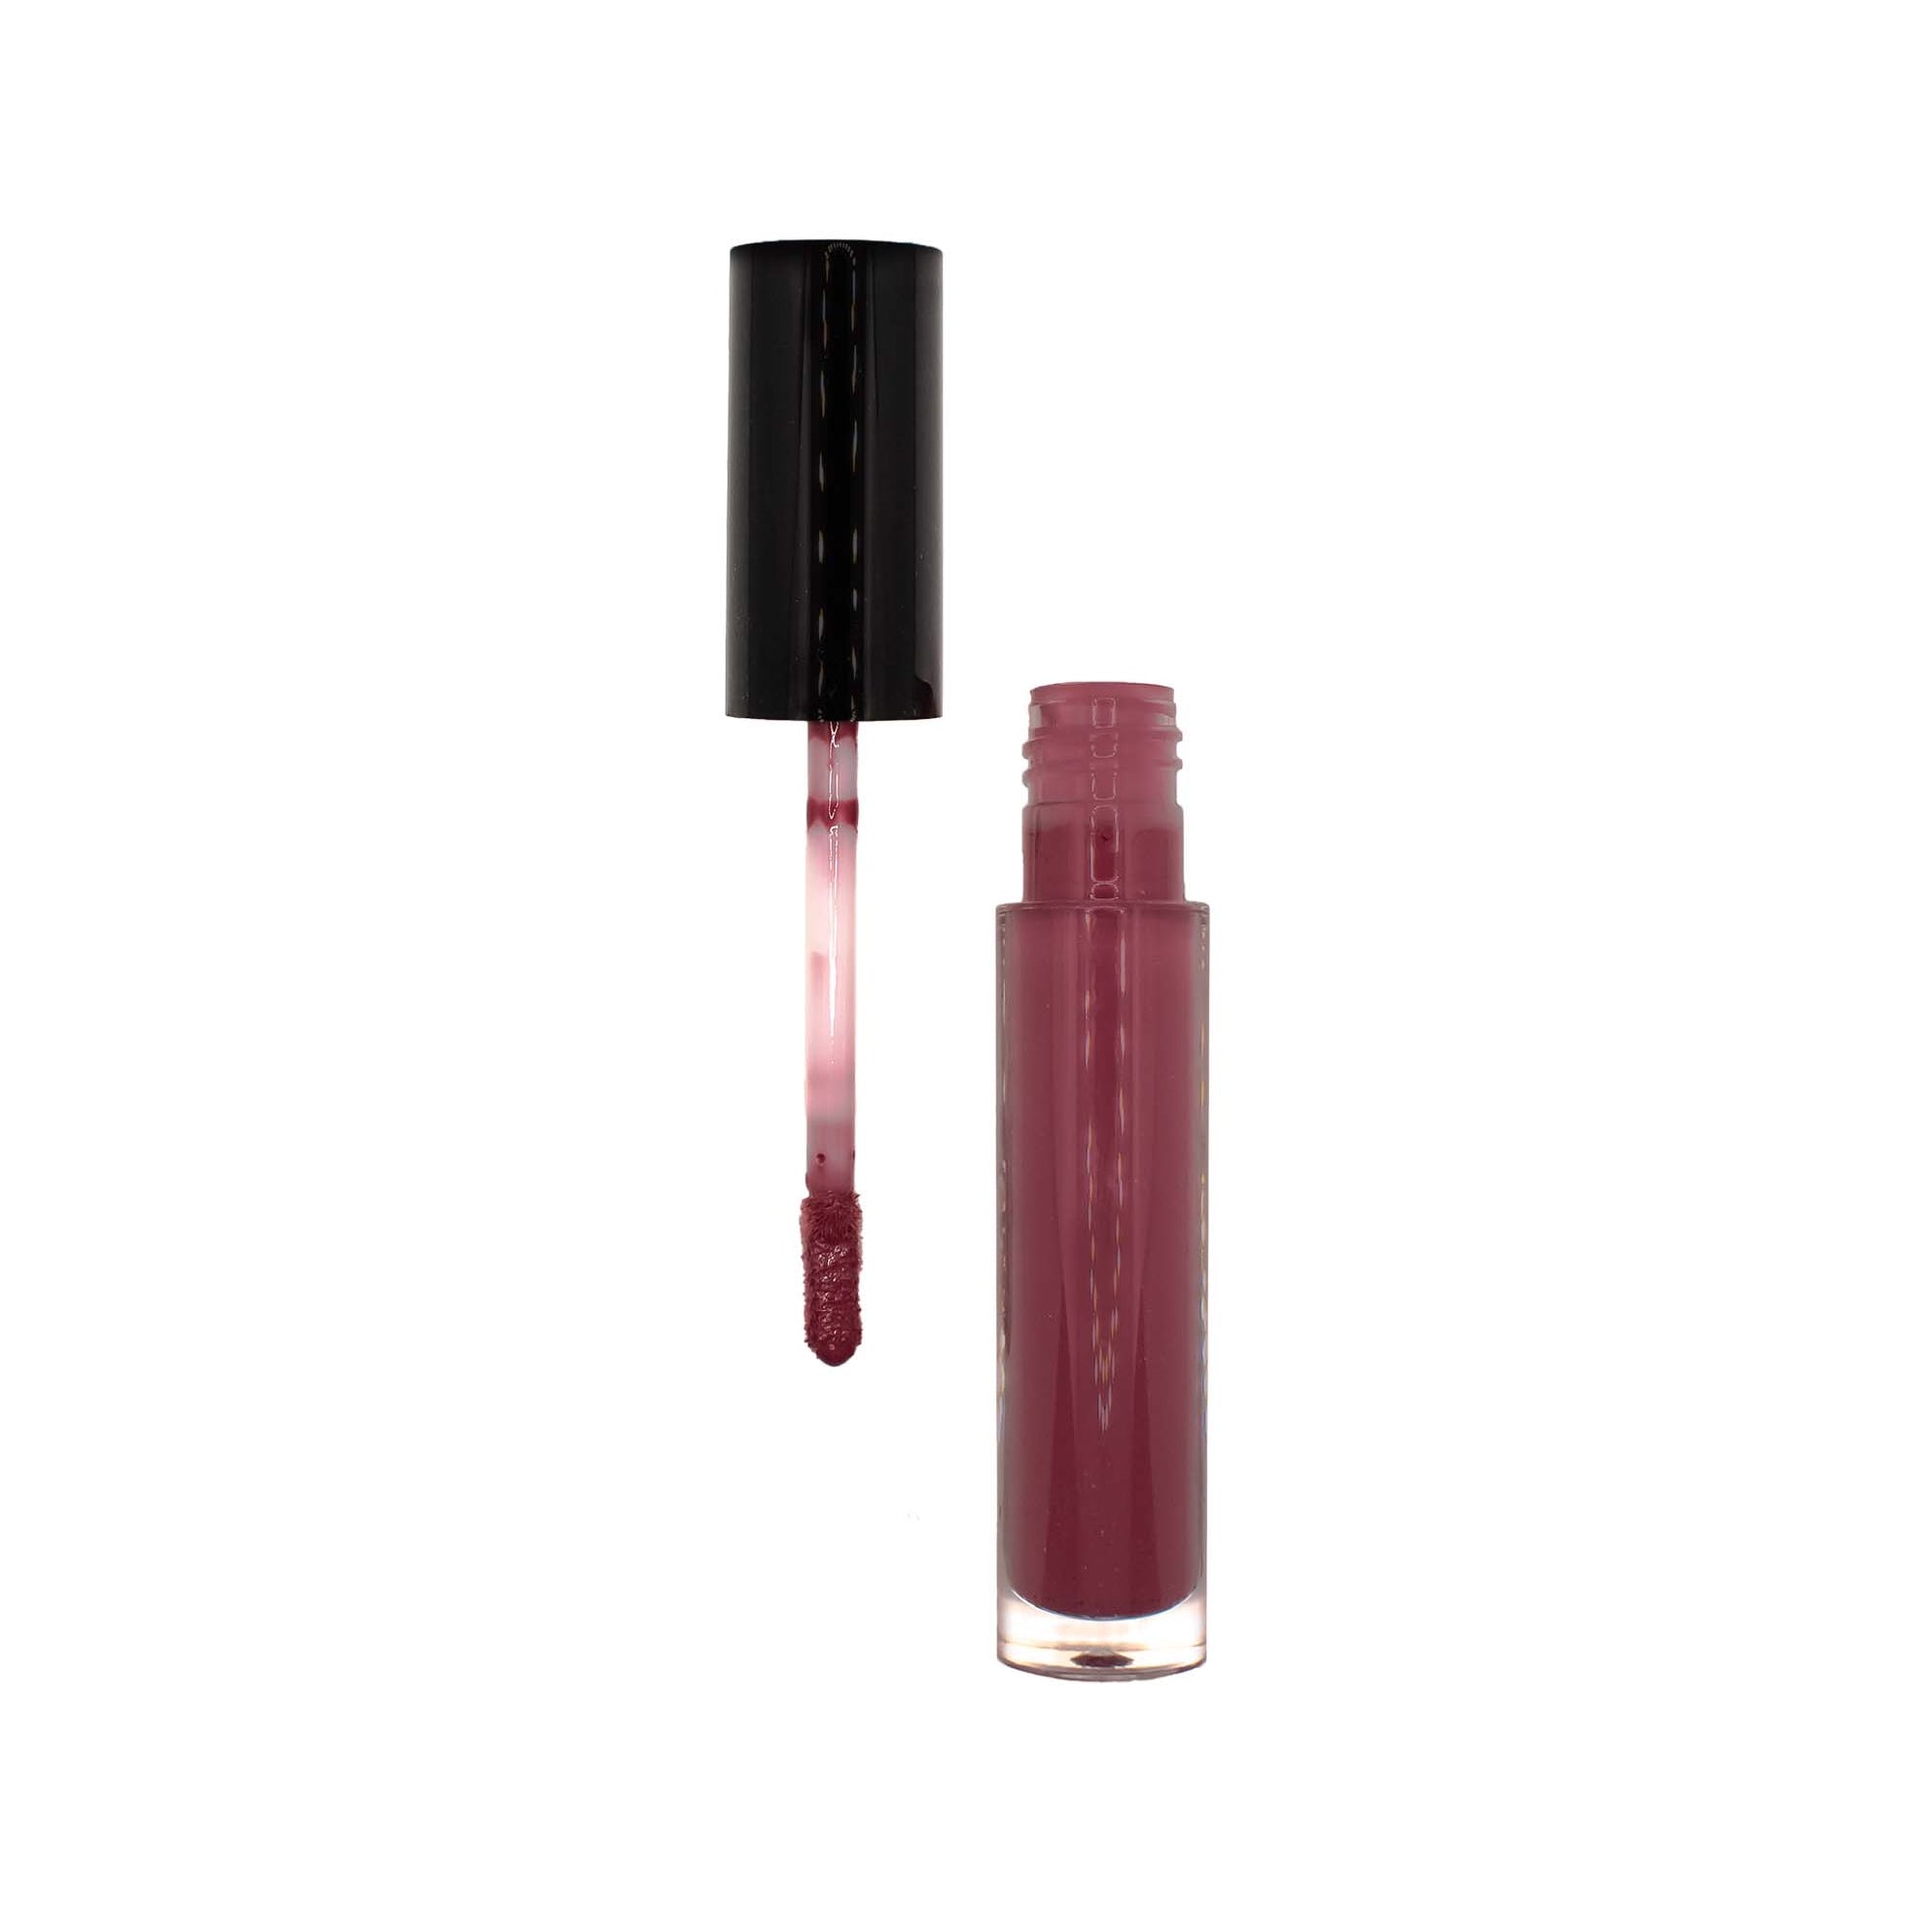 Take your gloss and brilliance to the next level with our Cruisin Organics liquid lip gloss. One swipe and your lips will look fuller with an illuminating shine. Our high impact, liquid lip gloss is formulated so you can have that effortless, brilliant gloss throughout the day or night. Add the shine and pigments you want with both shimmer and natural finish options